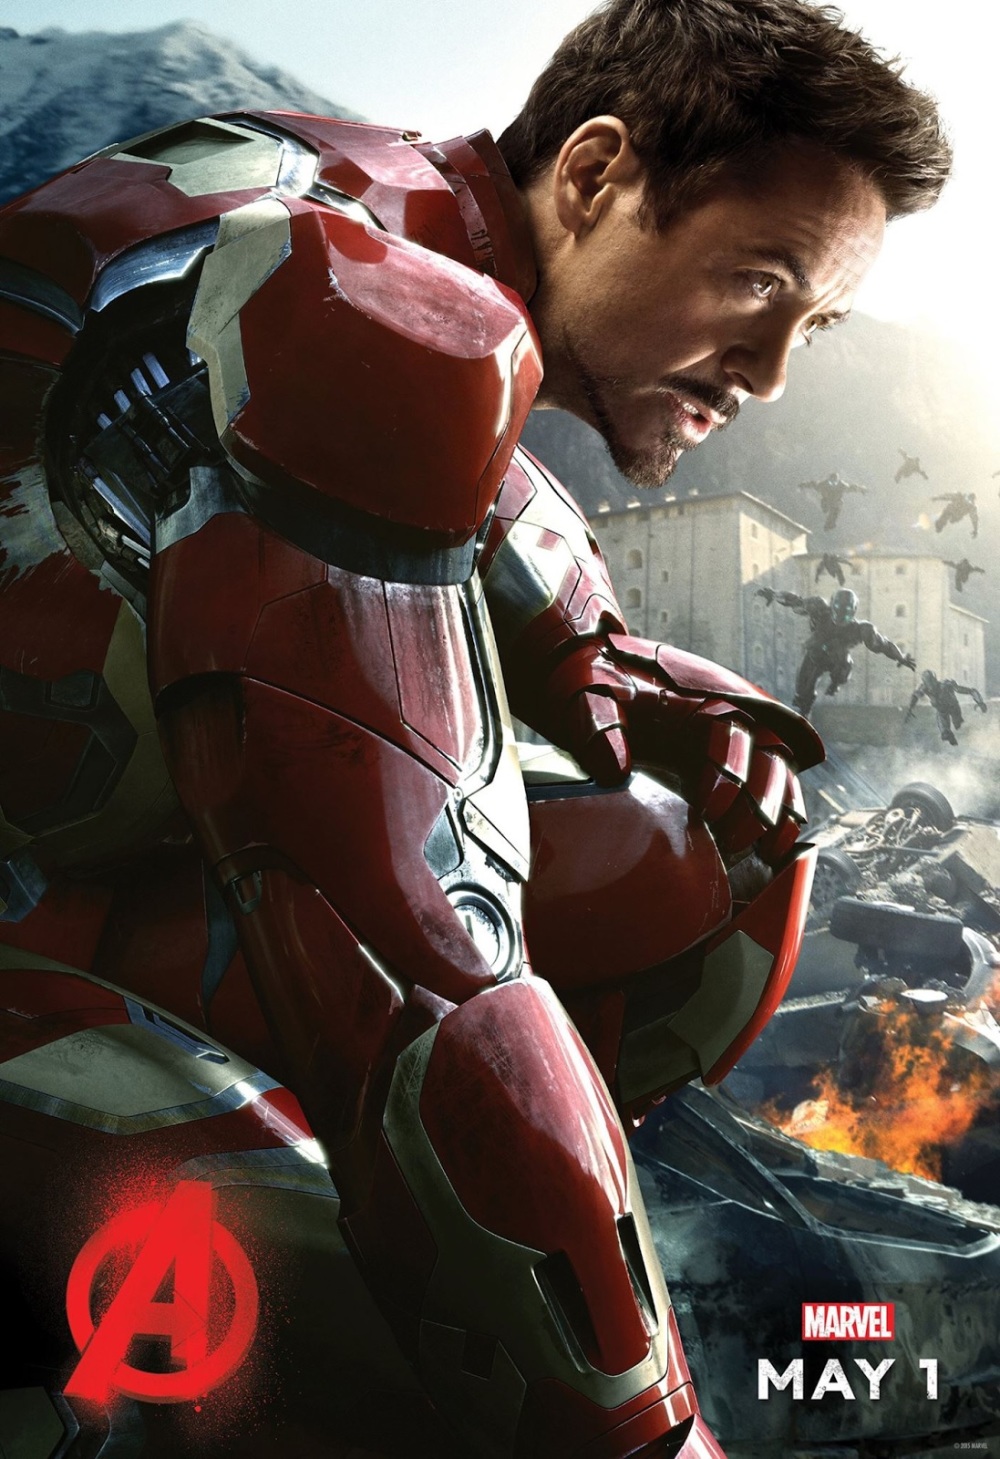 Iron Man-poster 'Avengers: Age of Ultron'